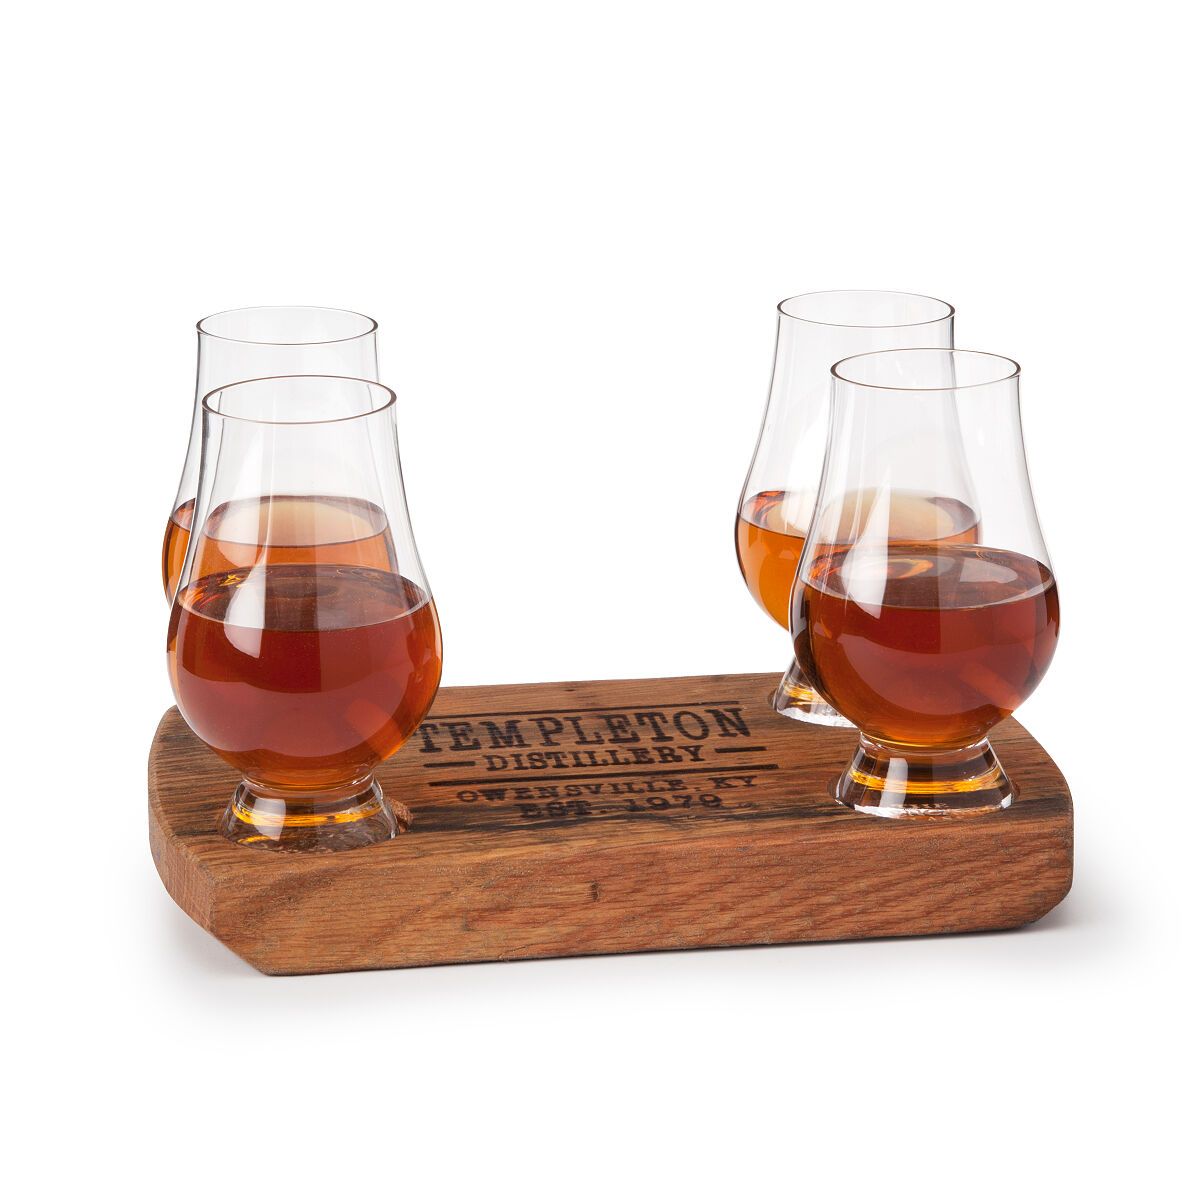 Personalized Bourbon Barrel Flight With Glasses